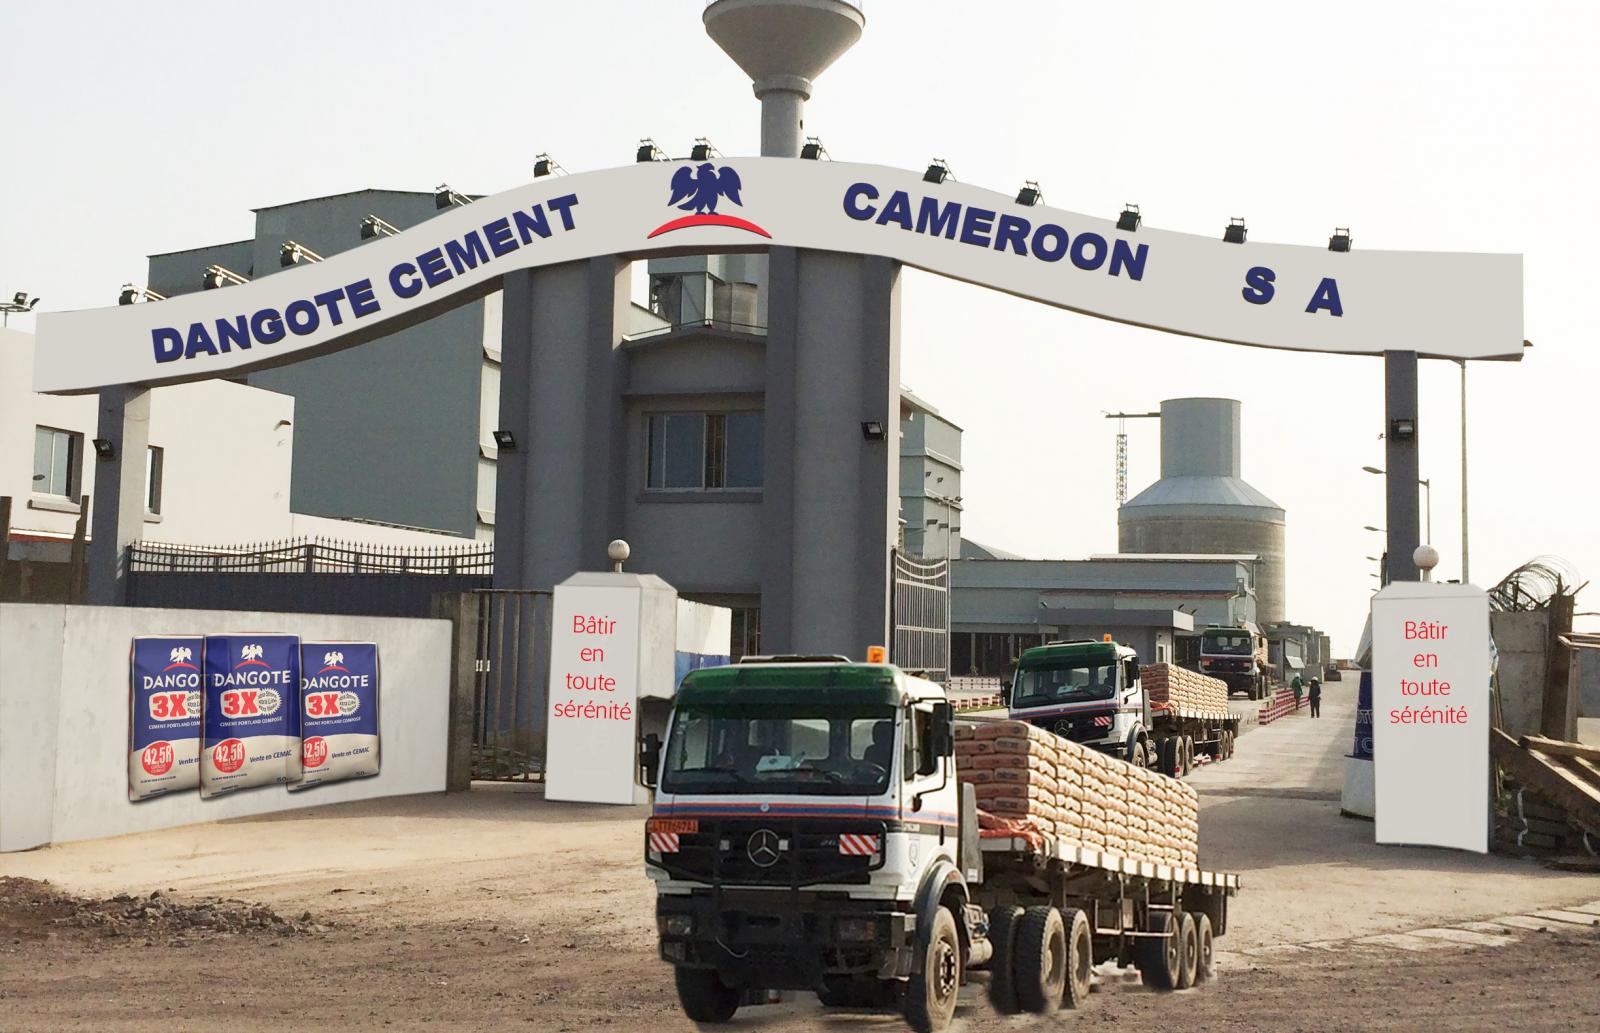 Dangote Cement considers buyback of 10% of issued shares